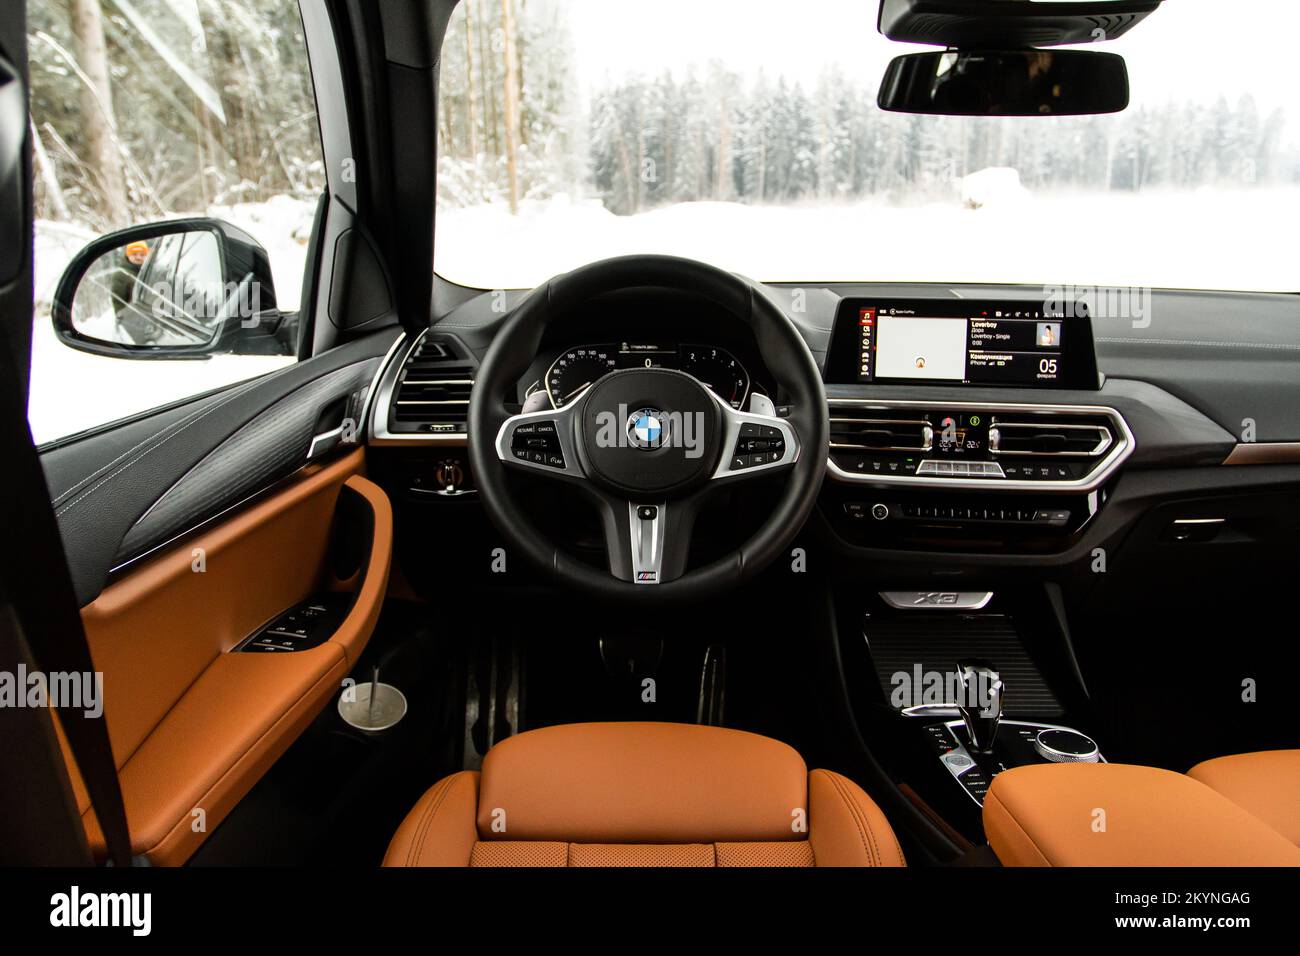 MOSCOW, RUSSIA - FEBRUARY 05, 2022. BMW X3 (G01), interior view. Compact luxury crossover SUV. BMW logo on the car steering wheel. Stock Photo